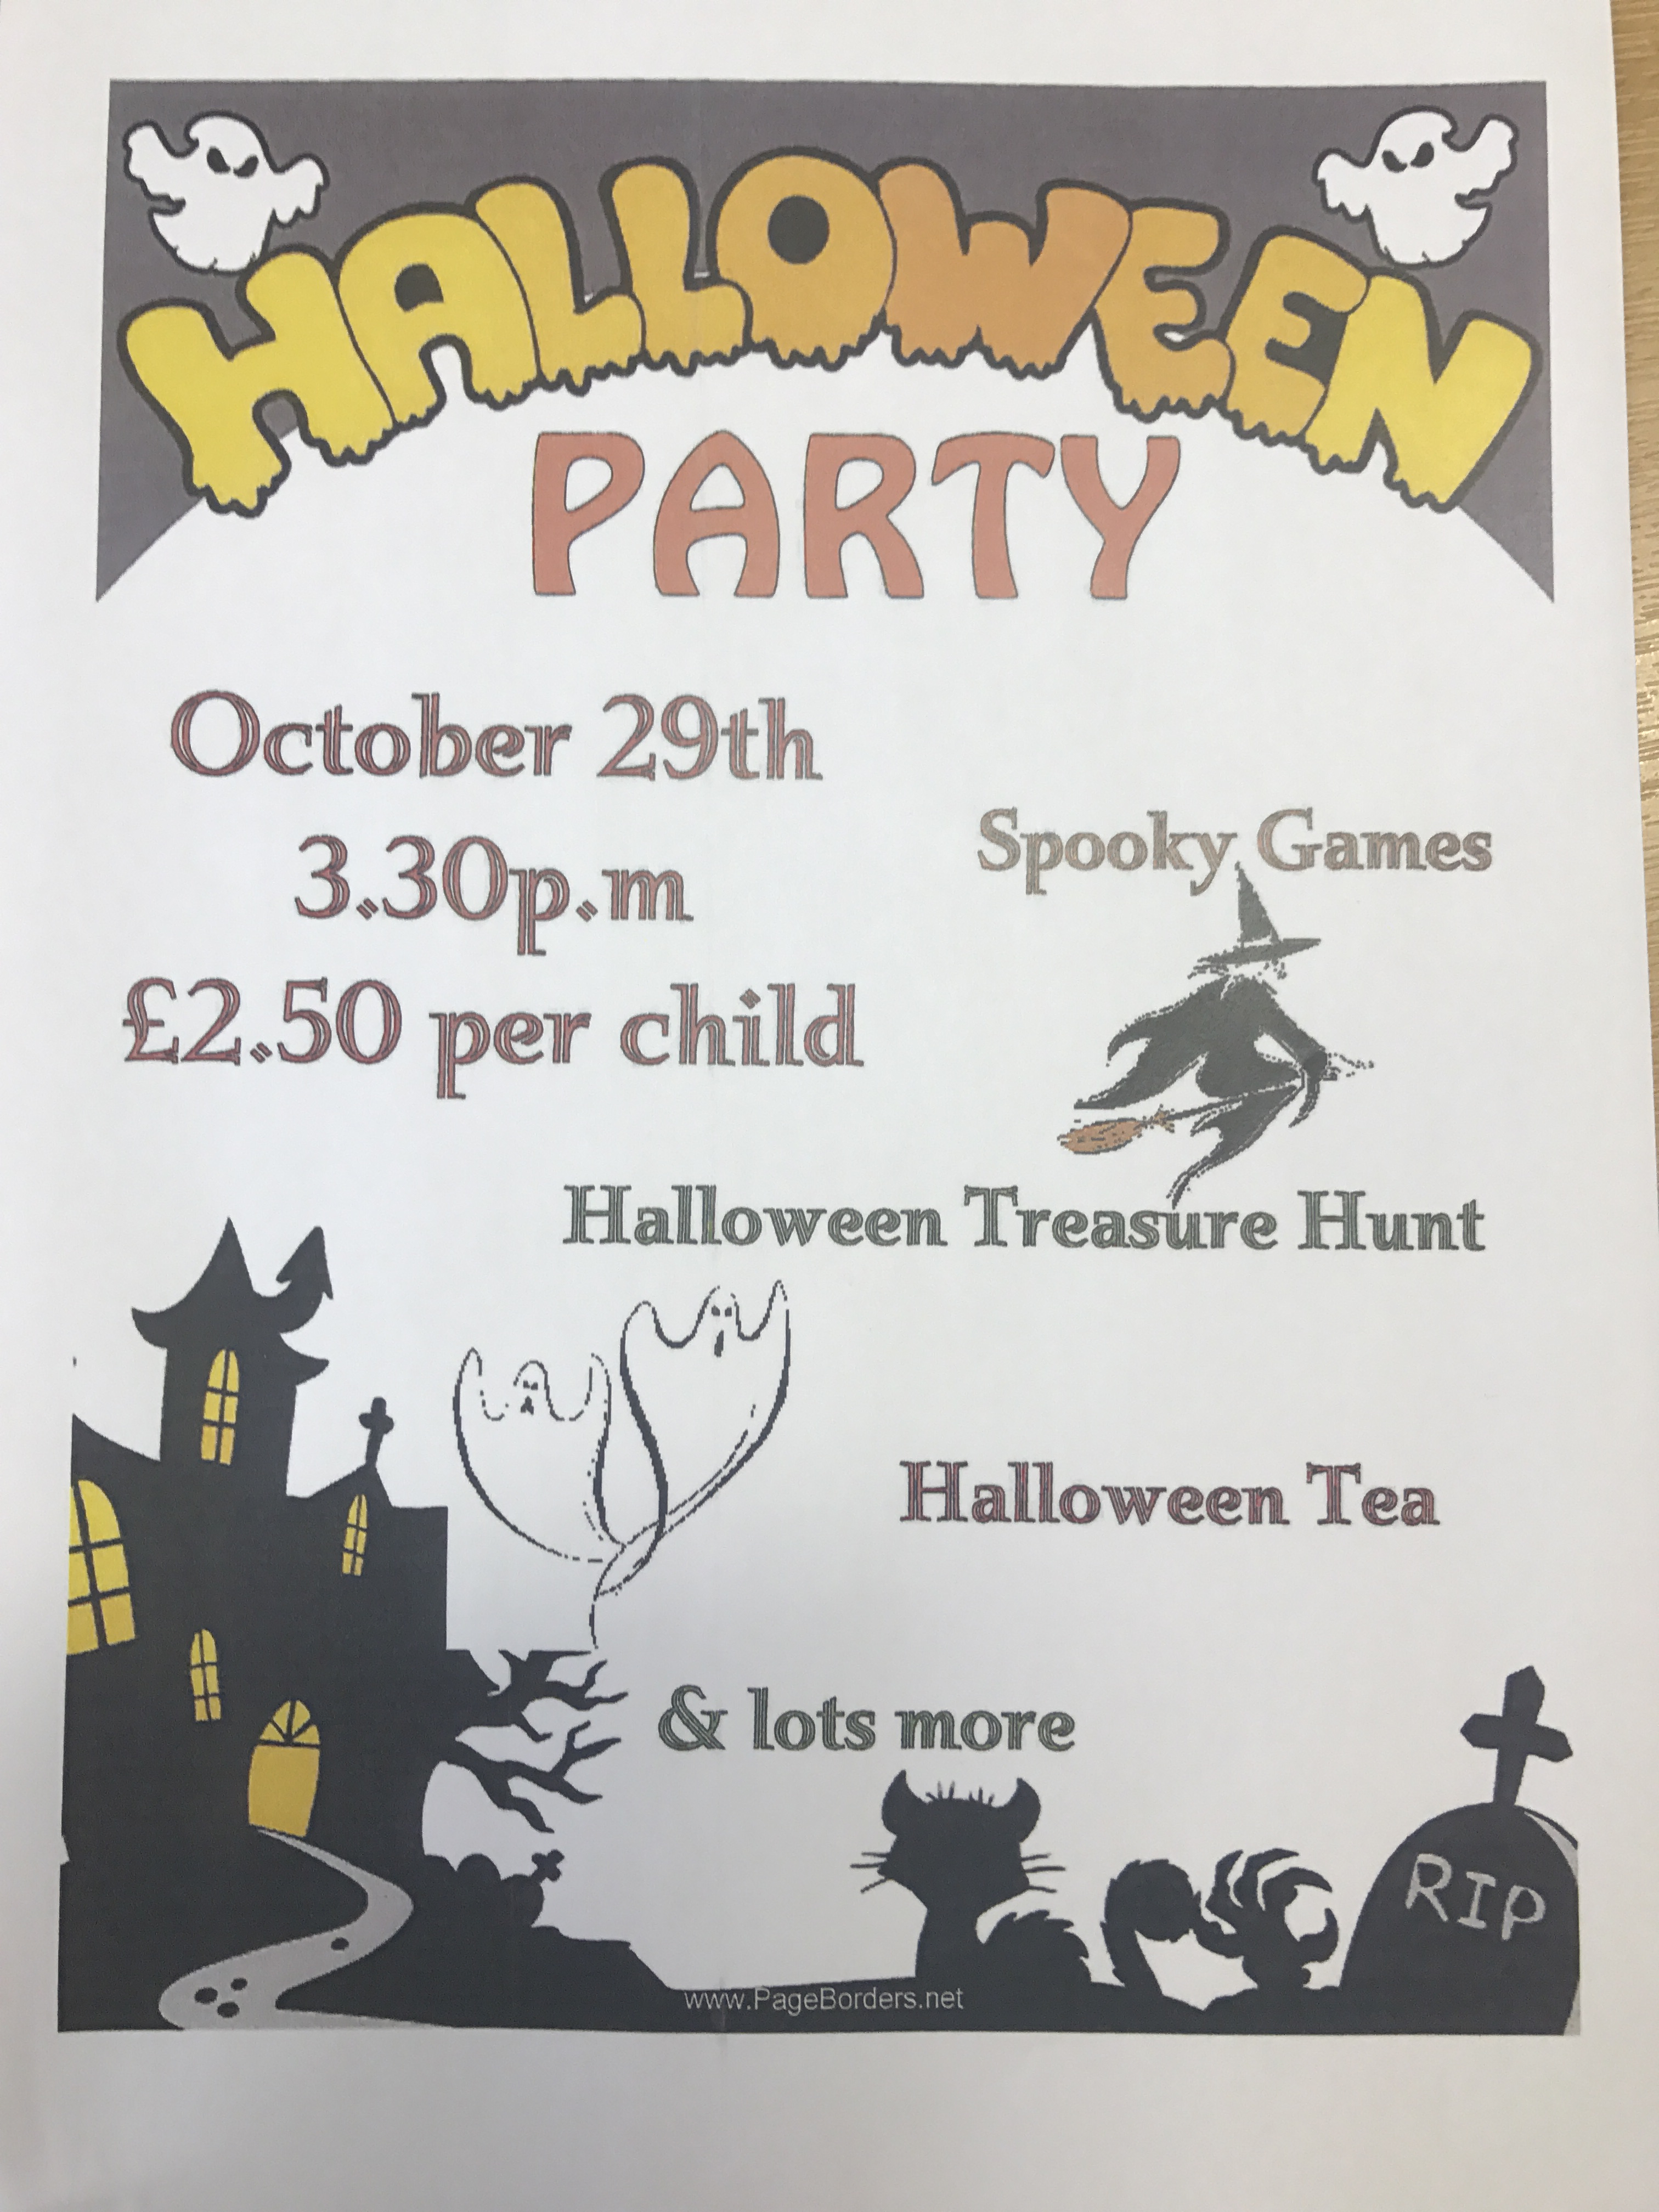 Four Seasons Care Centre Halloween Party 2017: Key Healthcare is dedicated to caring for elderly residents in safe. We have multiple dementia care homes including our care home middlesbrough, our care home St. Helen and care home saltburn. We excel in monitoring and improving care levels.